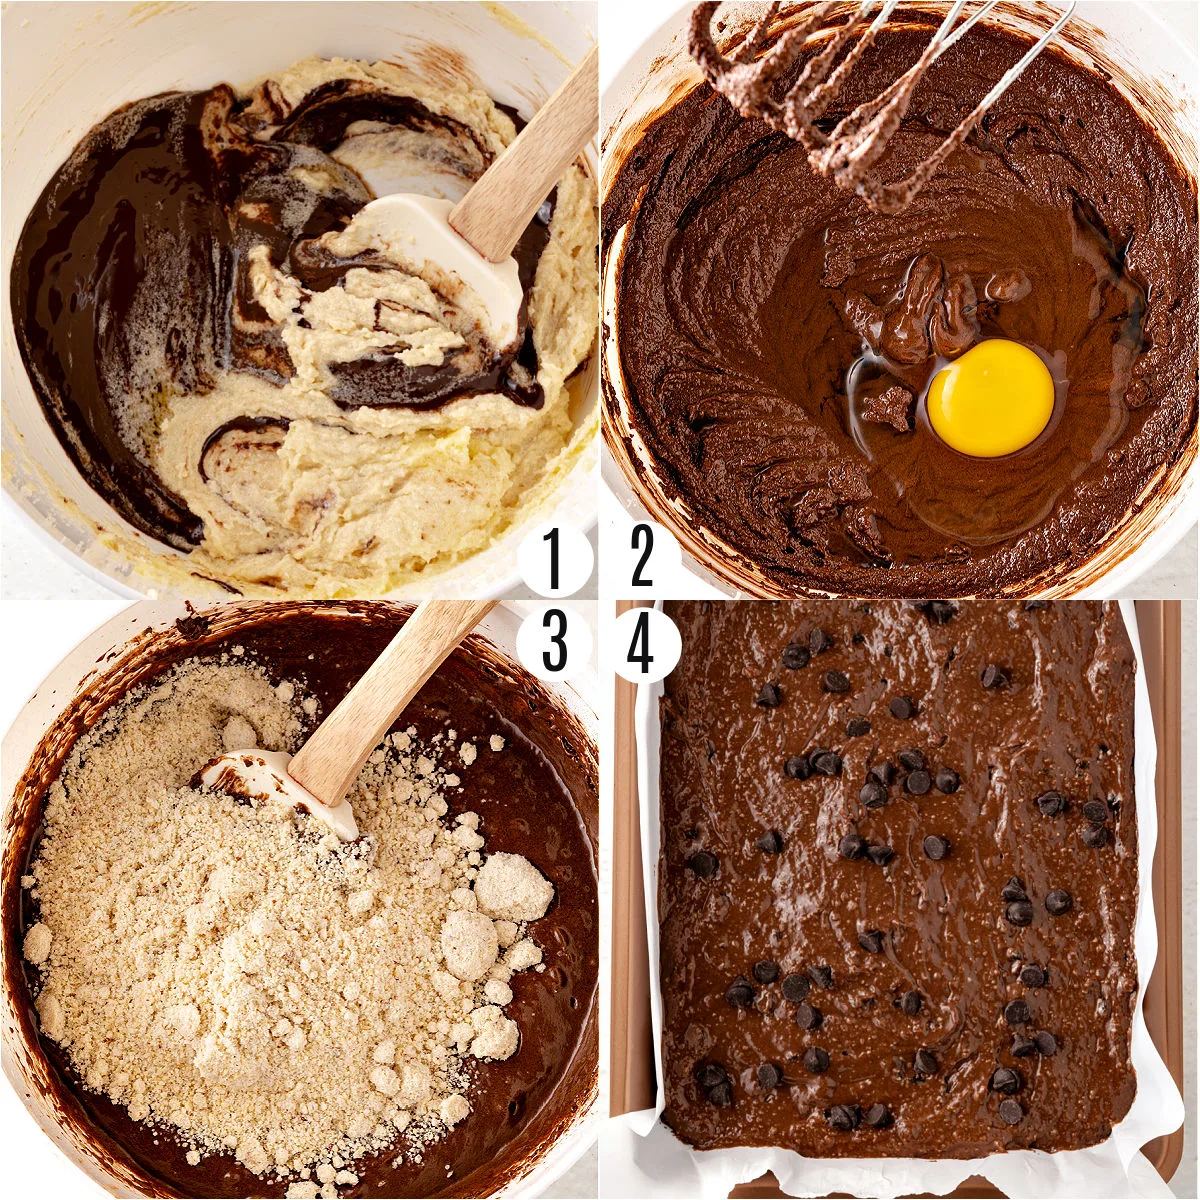 Step by step photos showing how to make almond flour brownies.